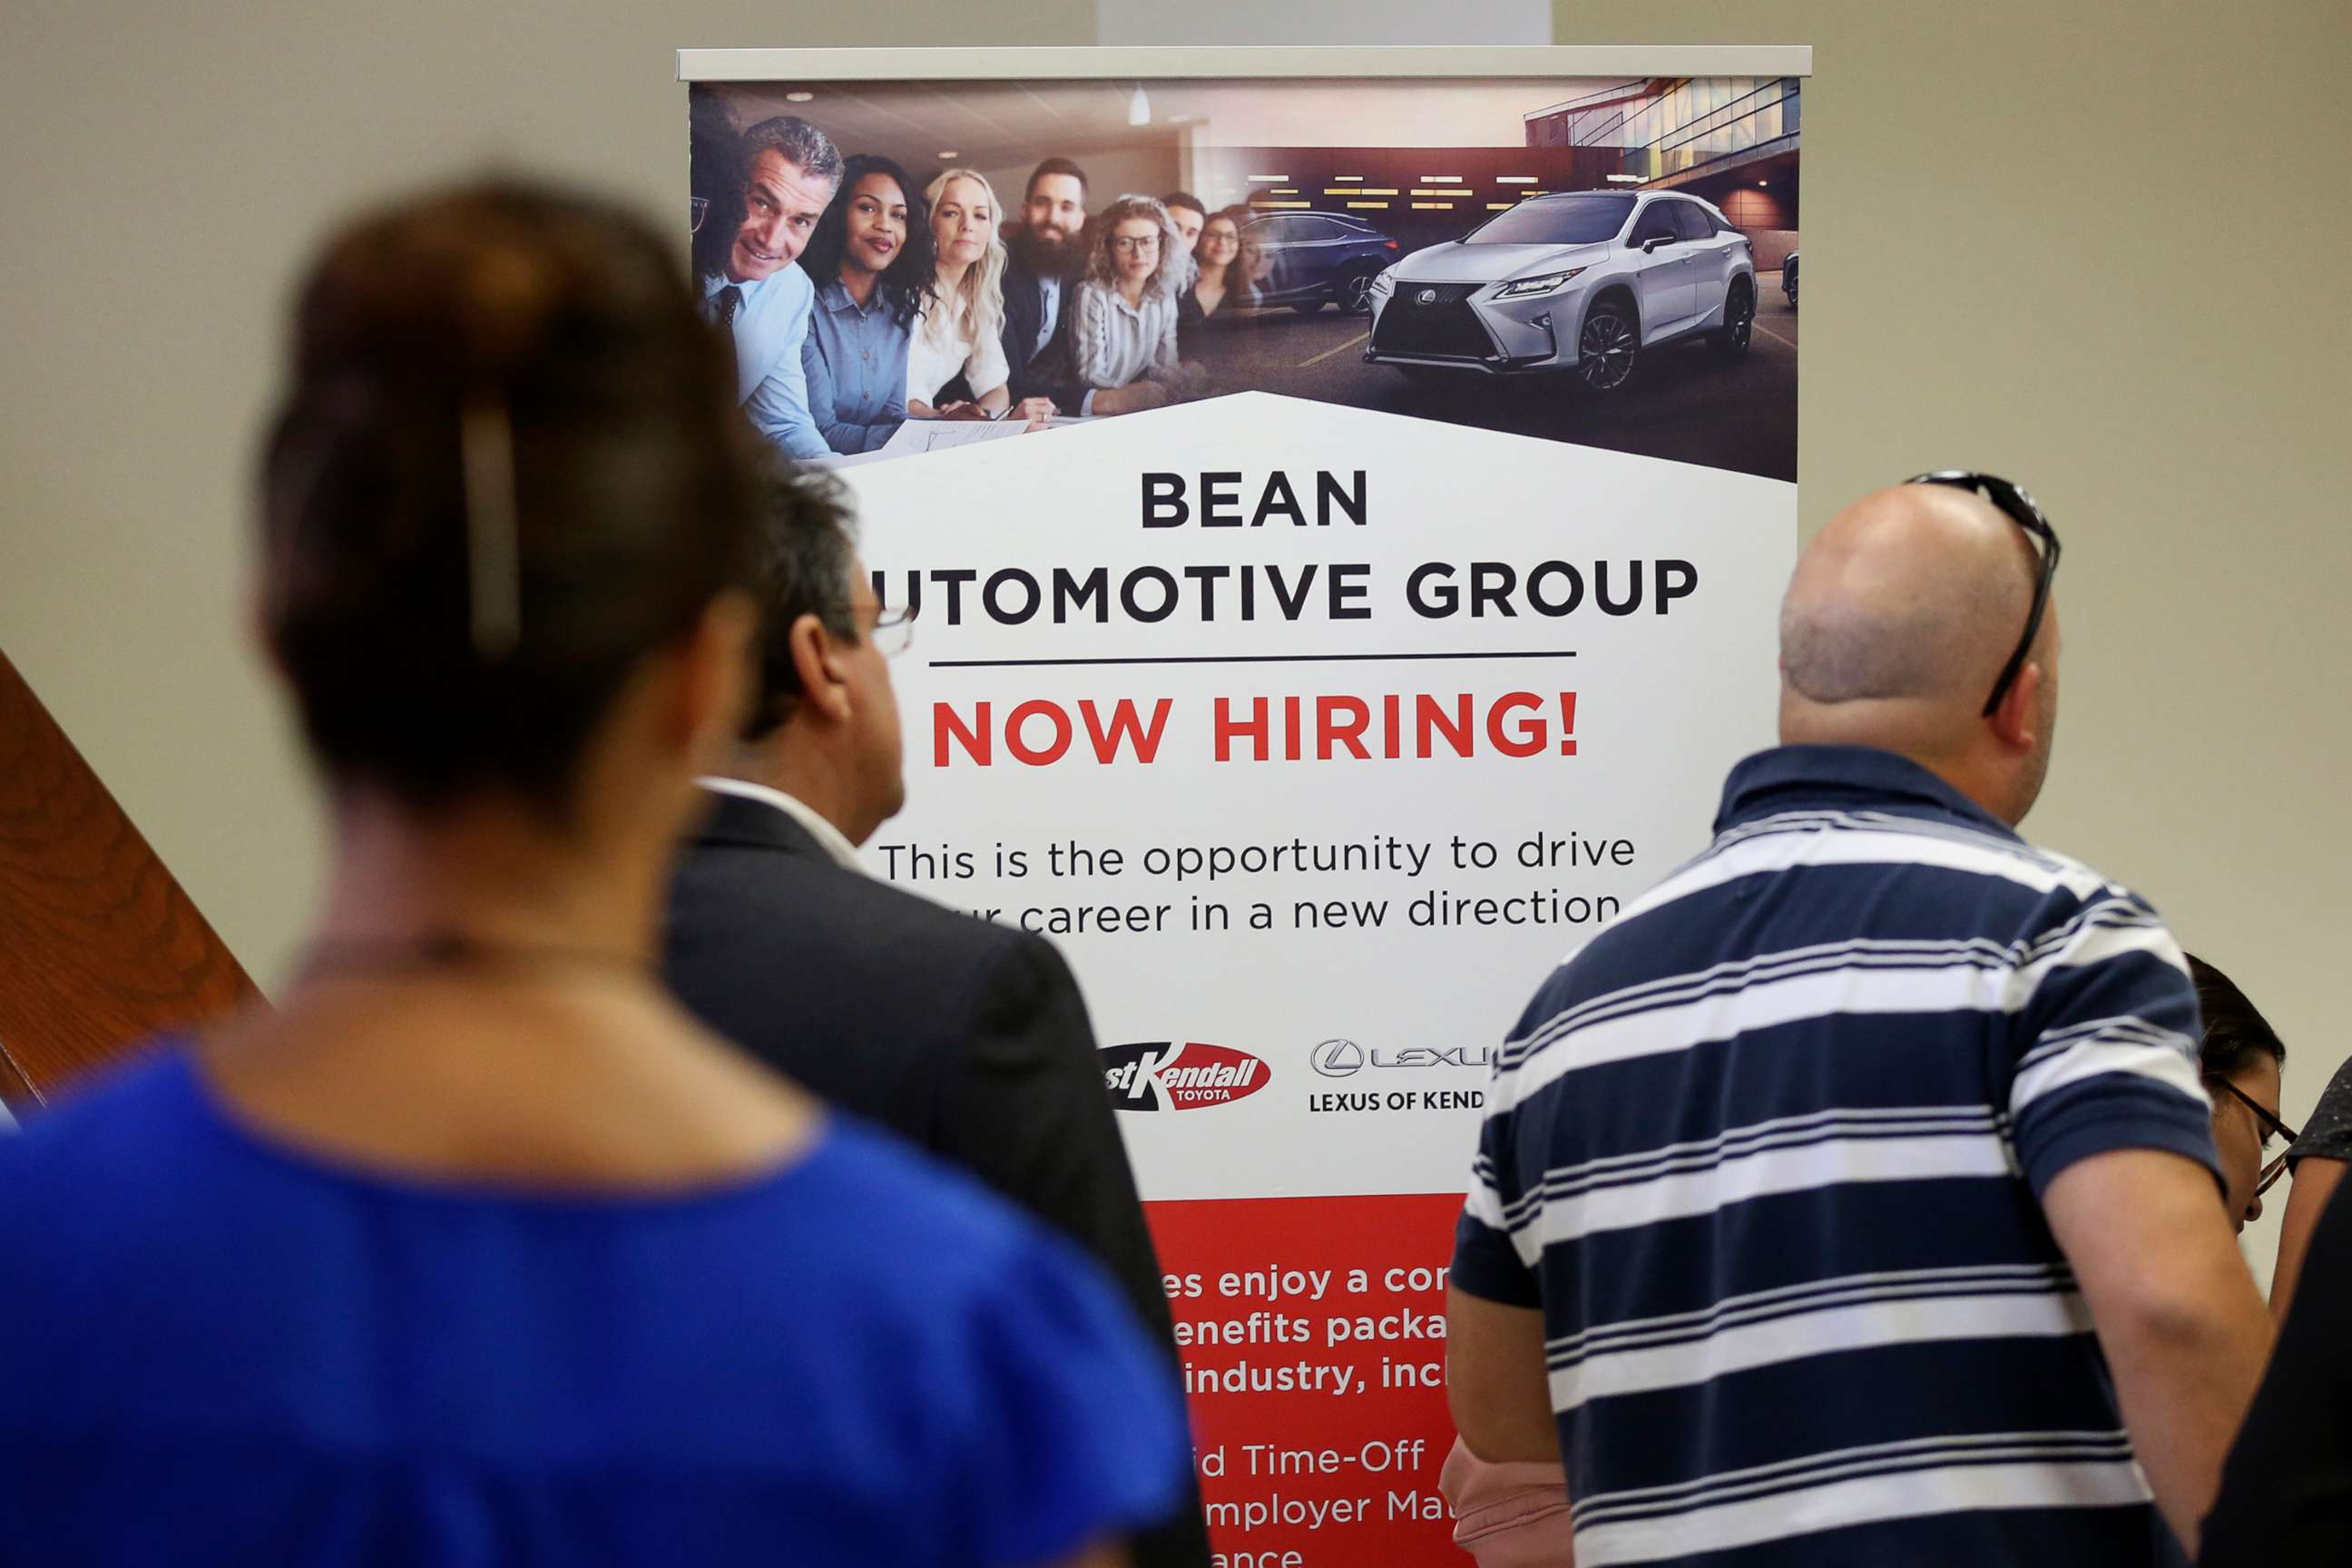 PHOTO: People stand in line to inquire about jobs available during a job fair, Sept. 18, 2019, in Miami.